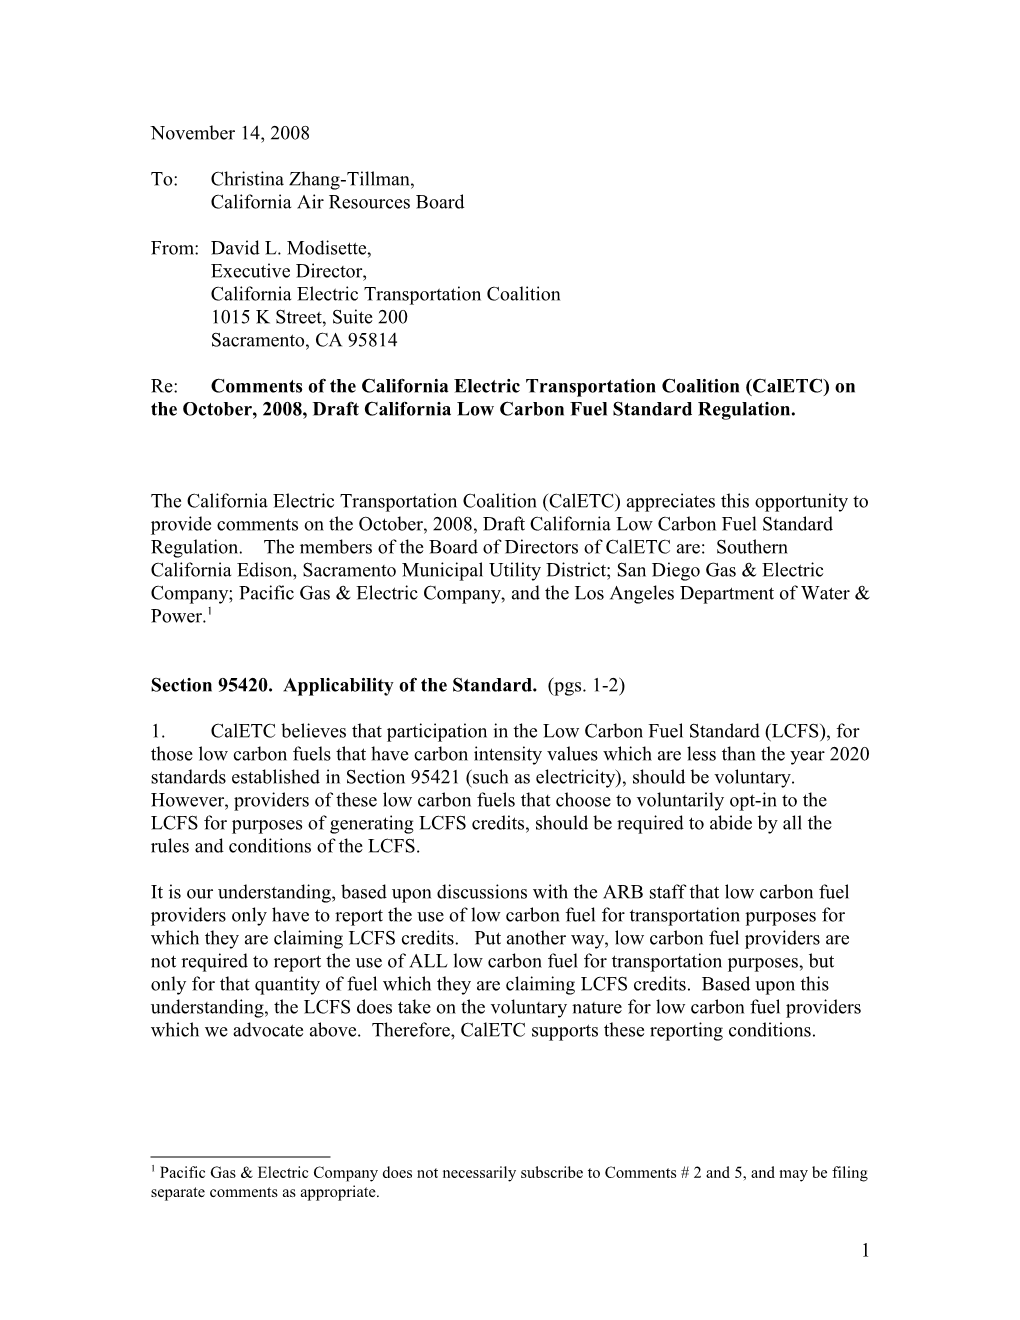 DRAFT Caletc Comments on the October, 2008, Draft California Low Carbon Fuel Standard Regulation